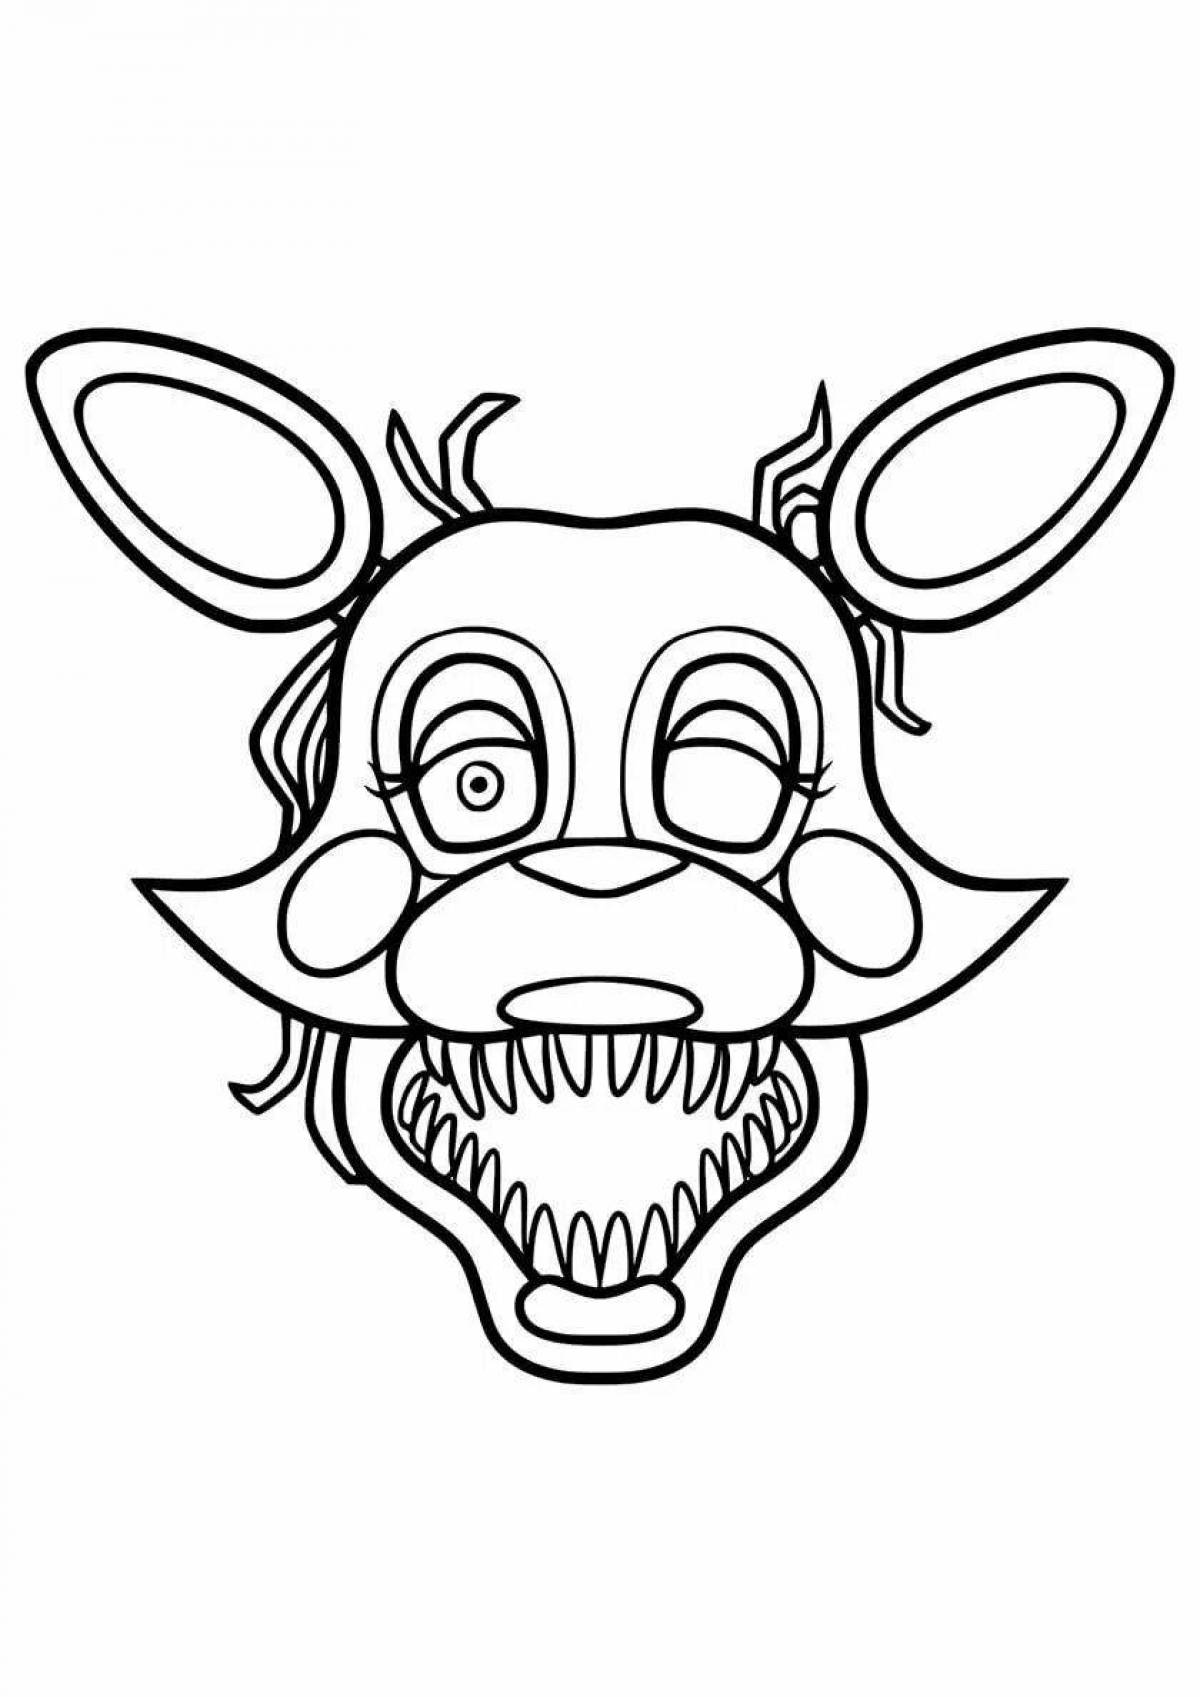 Naughty foxy boo coloring page